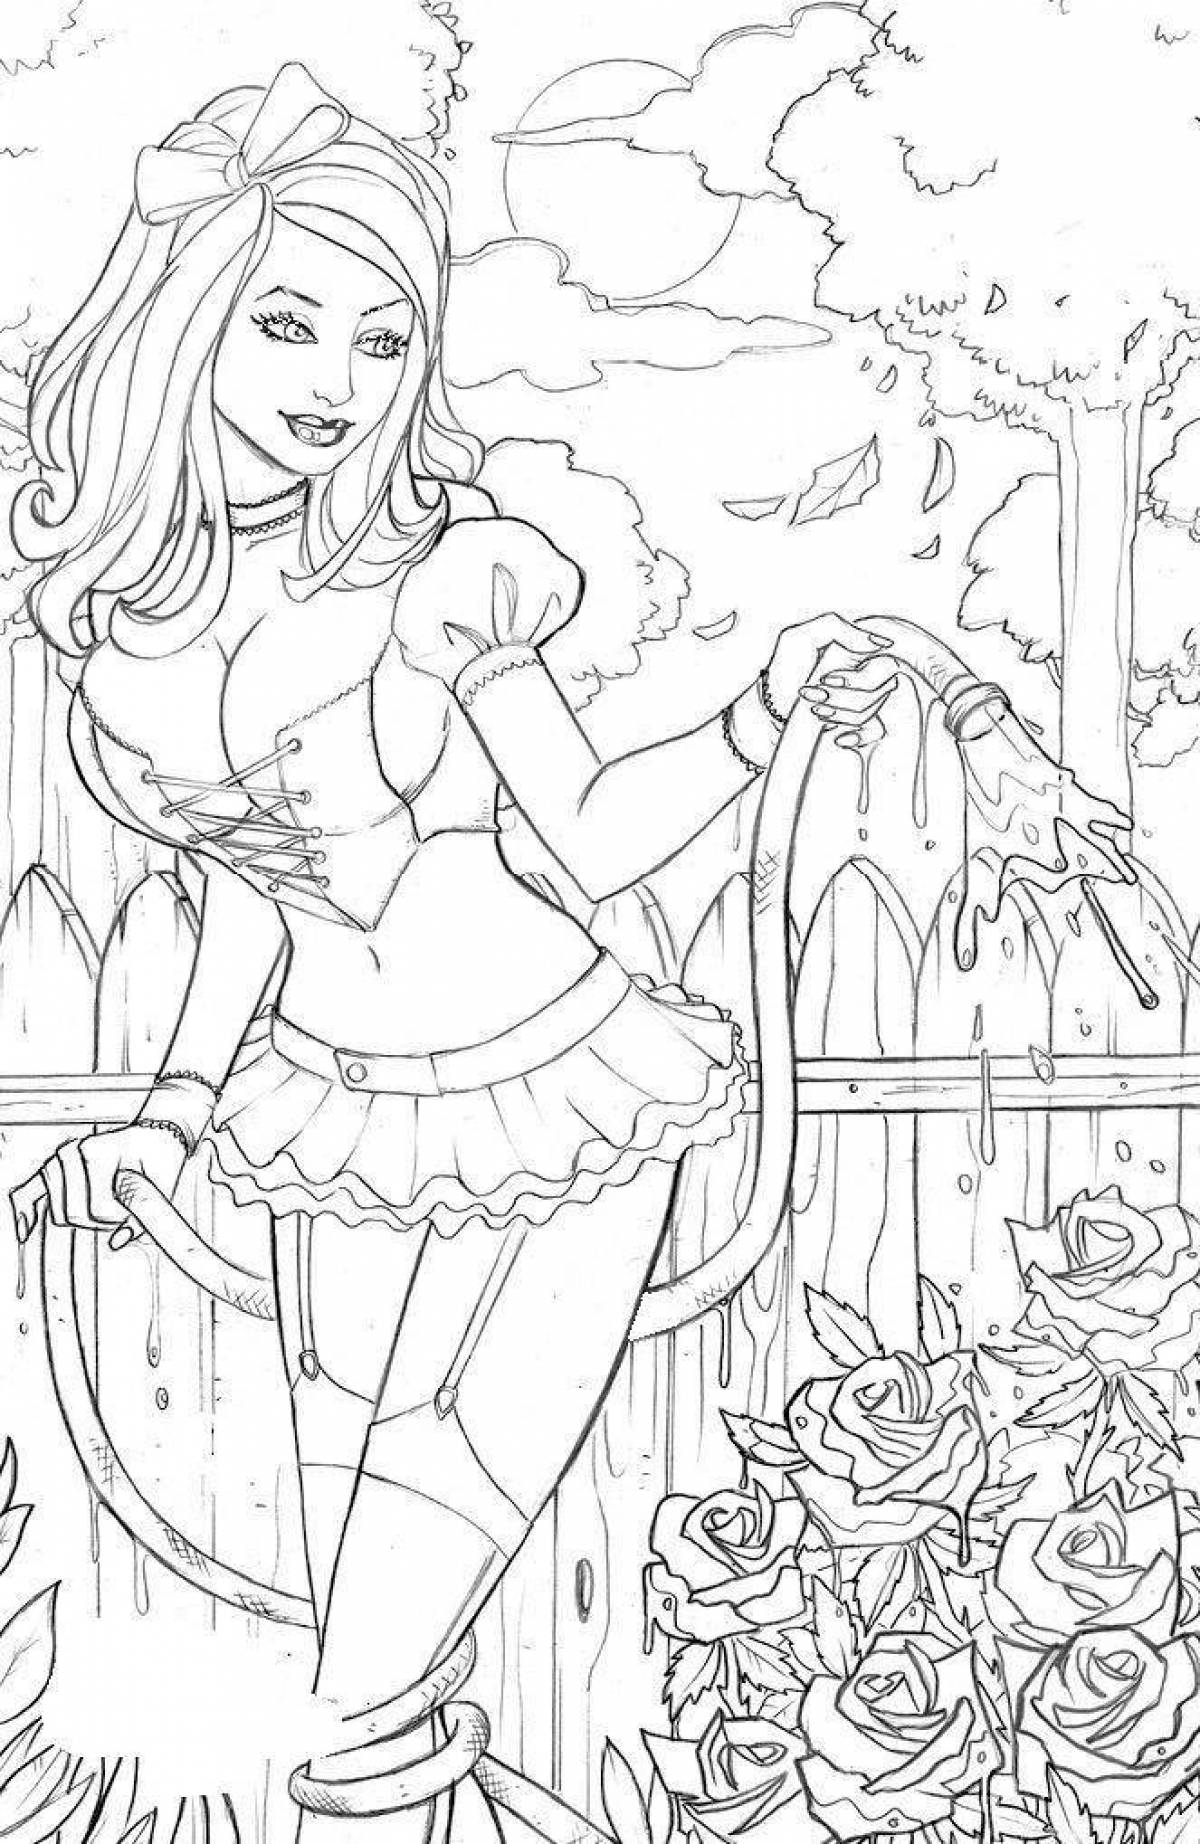 Amazing coloring pages for adults 18